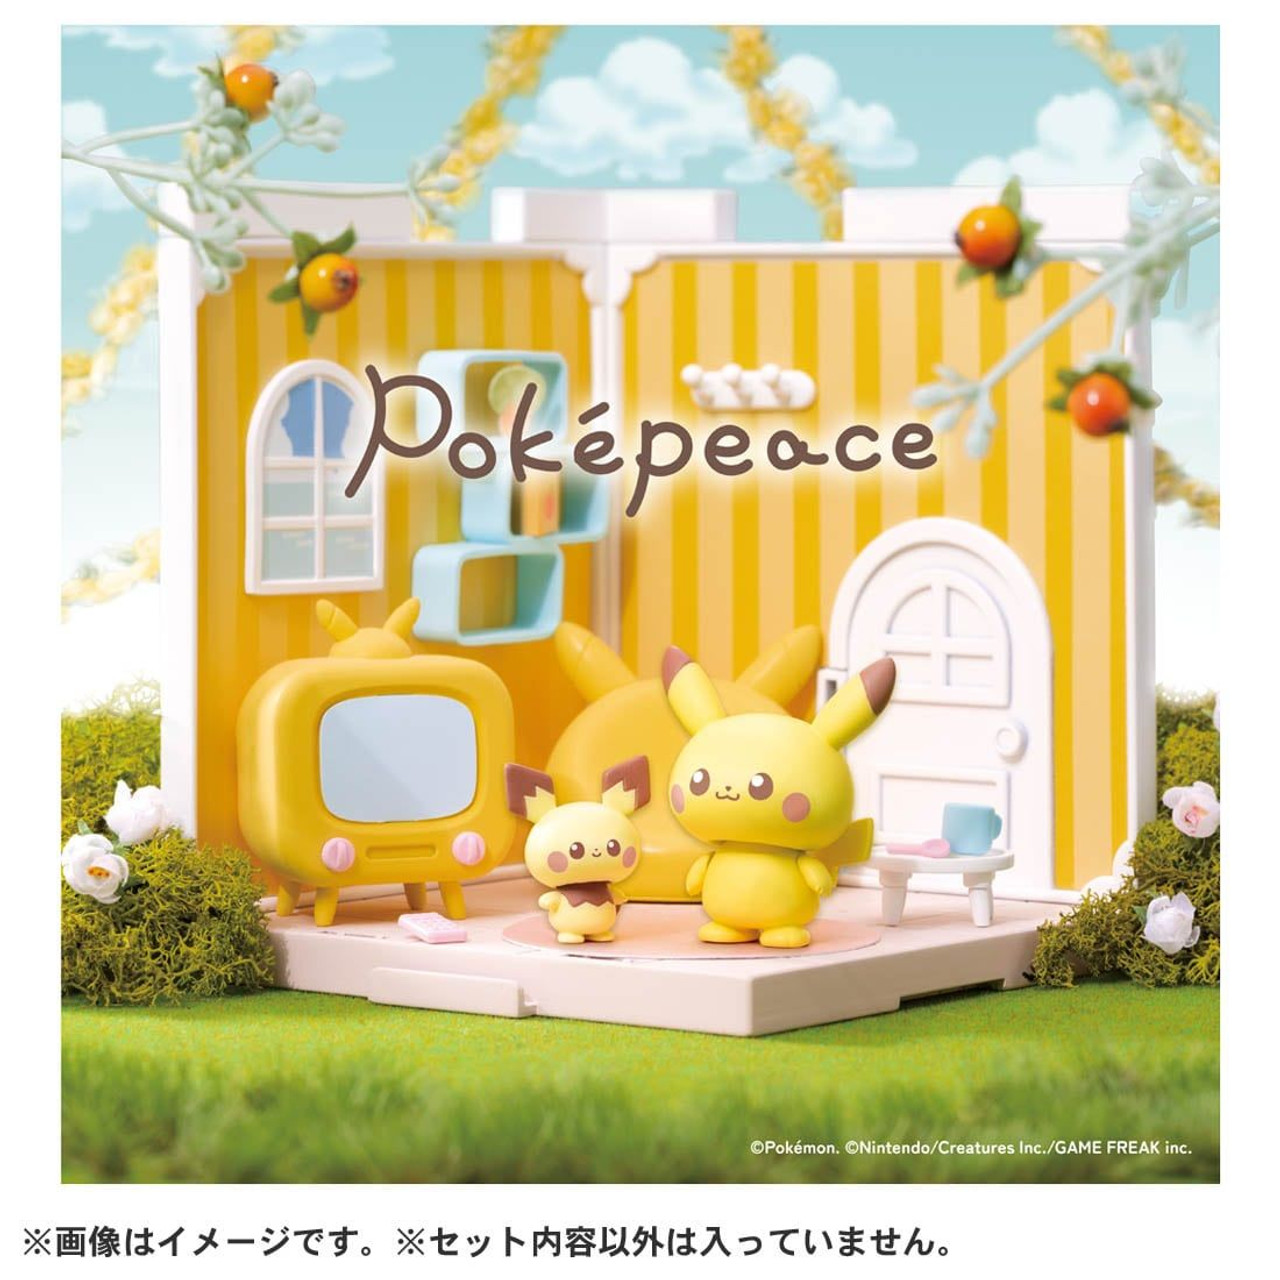 Pokemon gifts: A miniature living room with Pikachu and Pichu